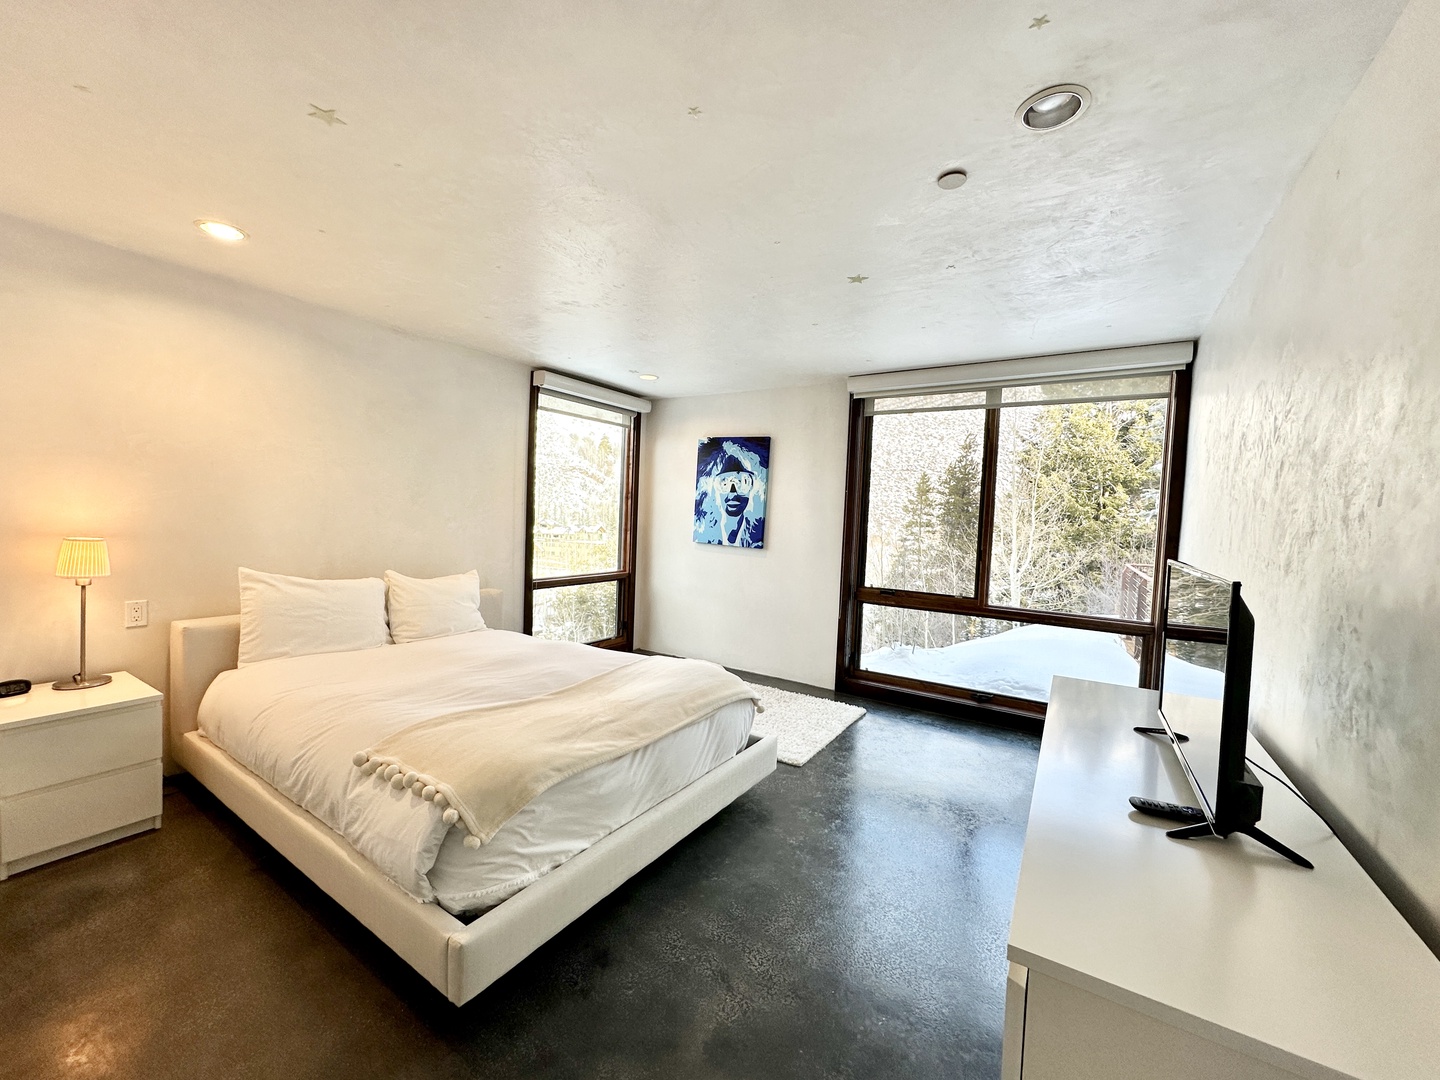 This 2nd-floor suite offers a queen bed, private ensuite, & Smart TV